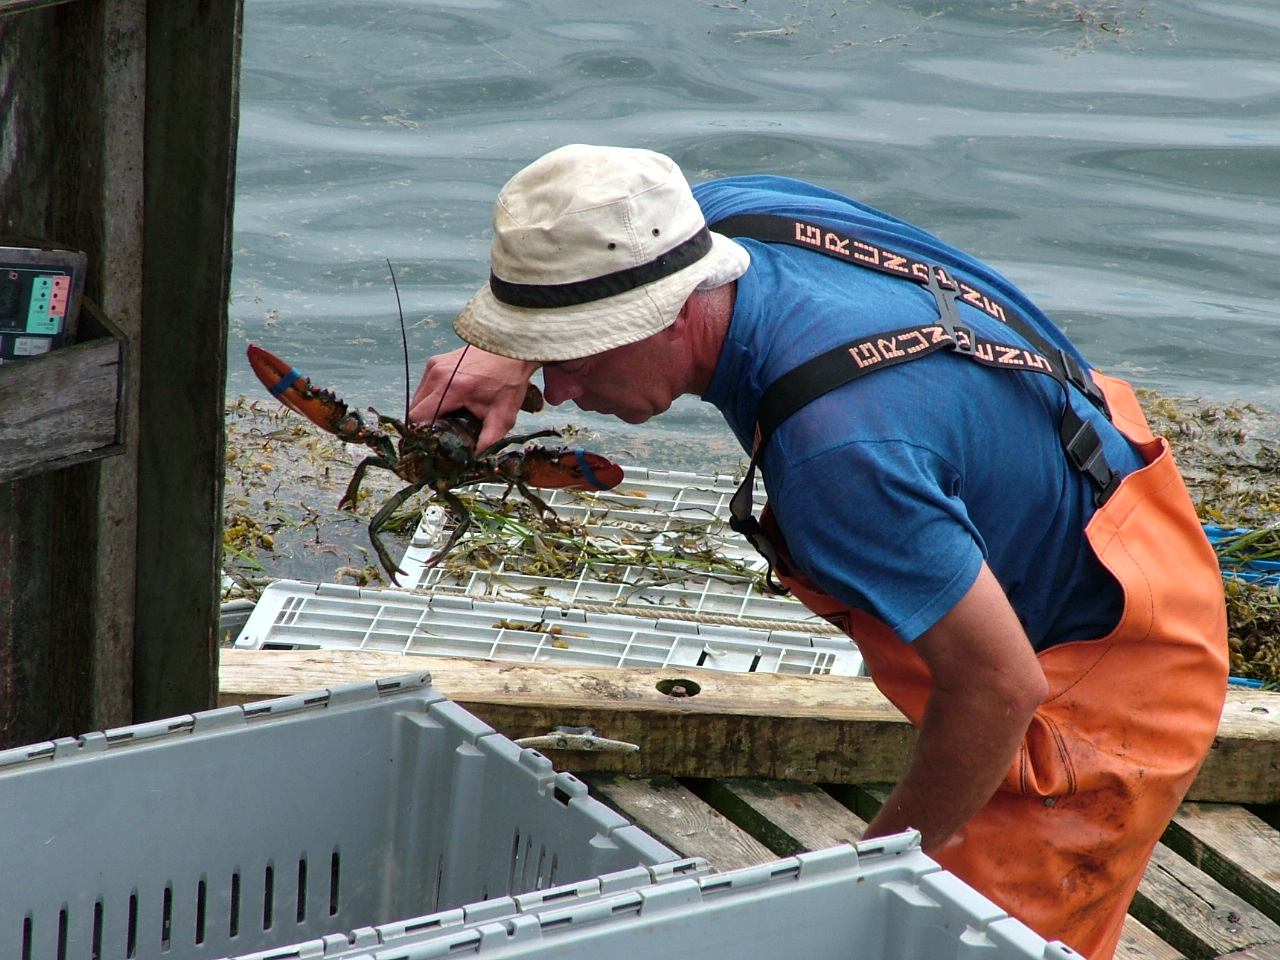 Lobsterman At Work (user submitted)